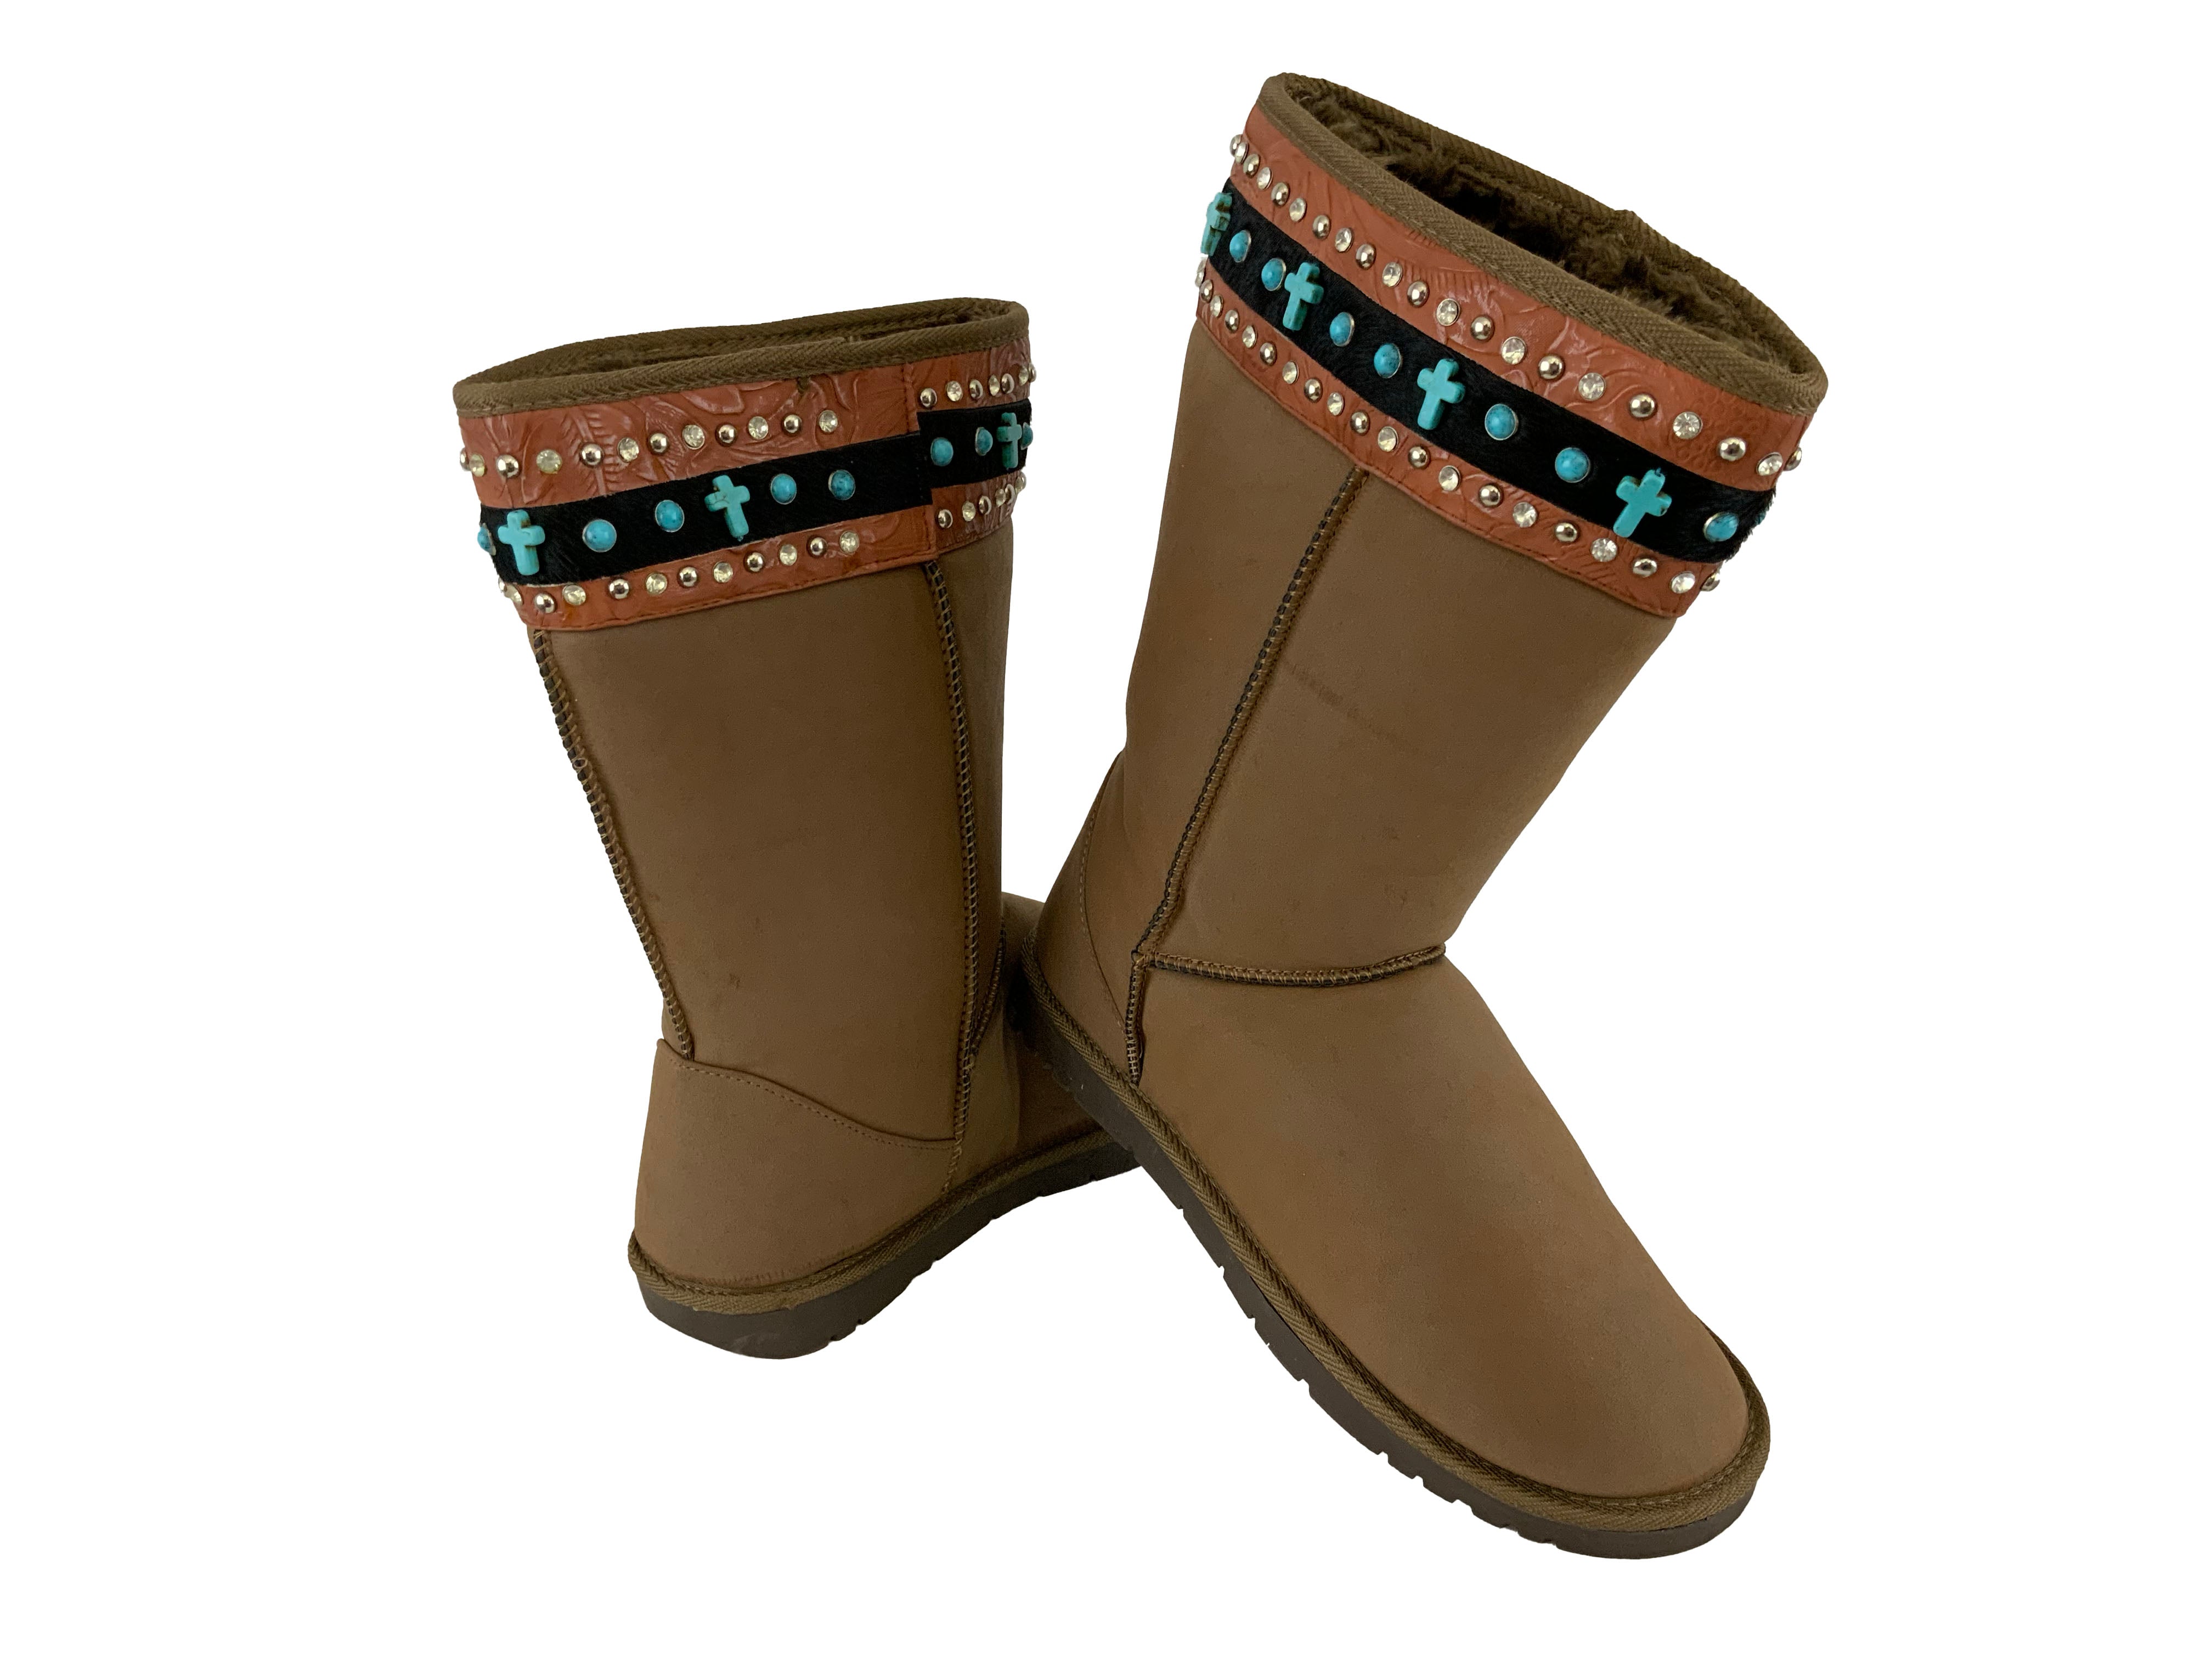 BA3344-CL: Mocha suede tall boot with black embossed camel colored leather stripe with crystal rhi Primary Showman Saddles and Tack   